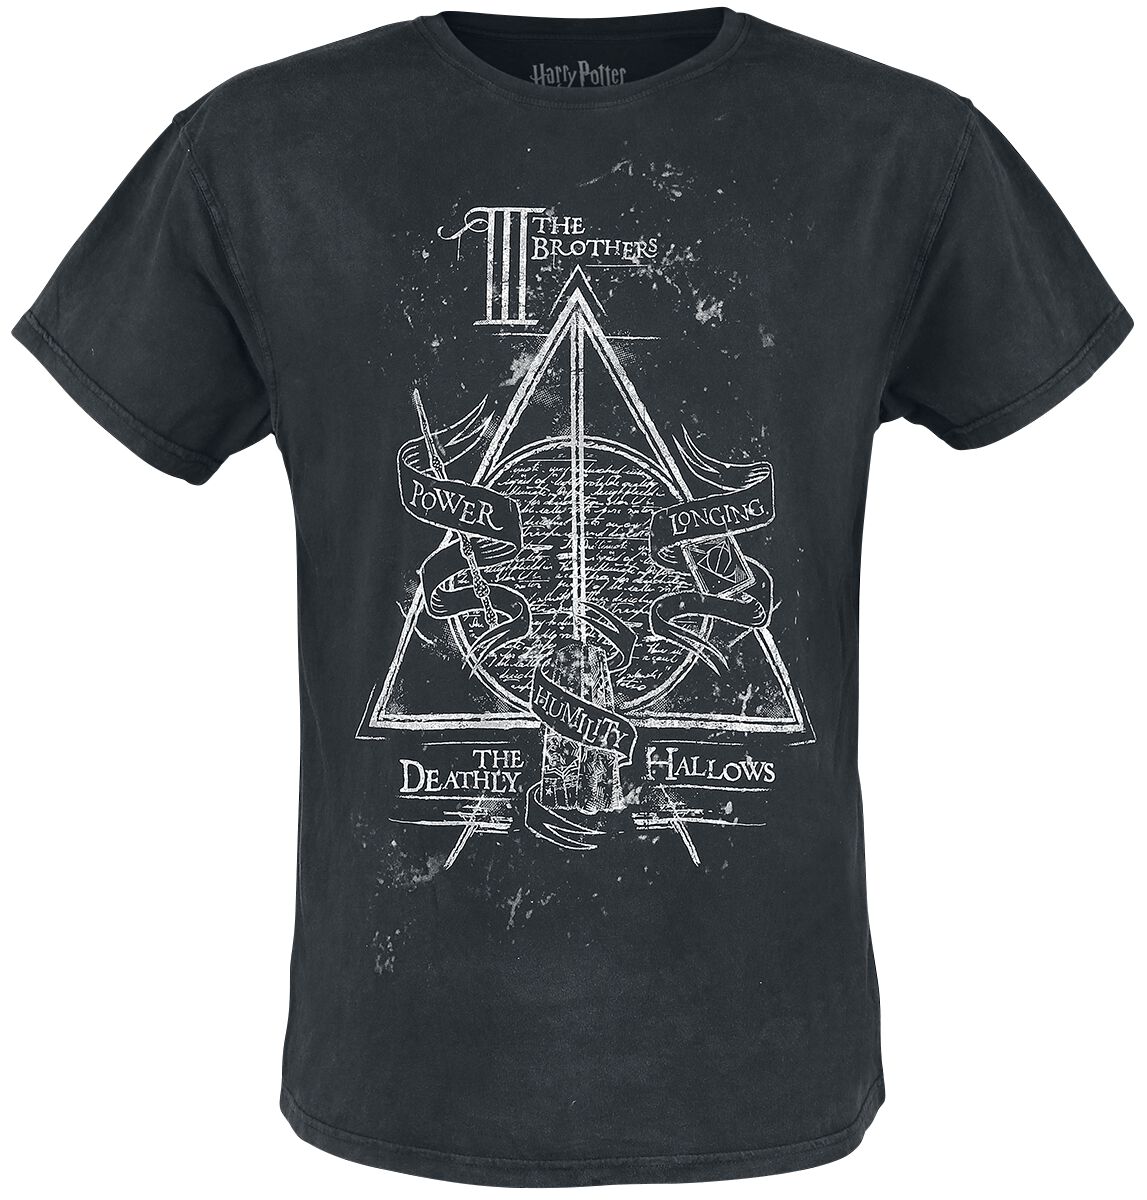 Harry Potter The Deathly Hallows T-Shirt schwarz in S